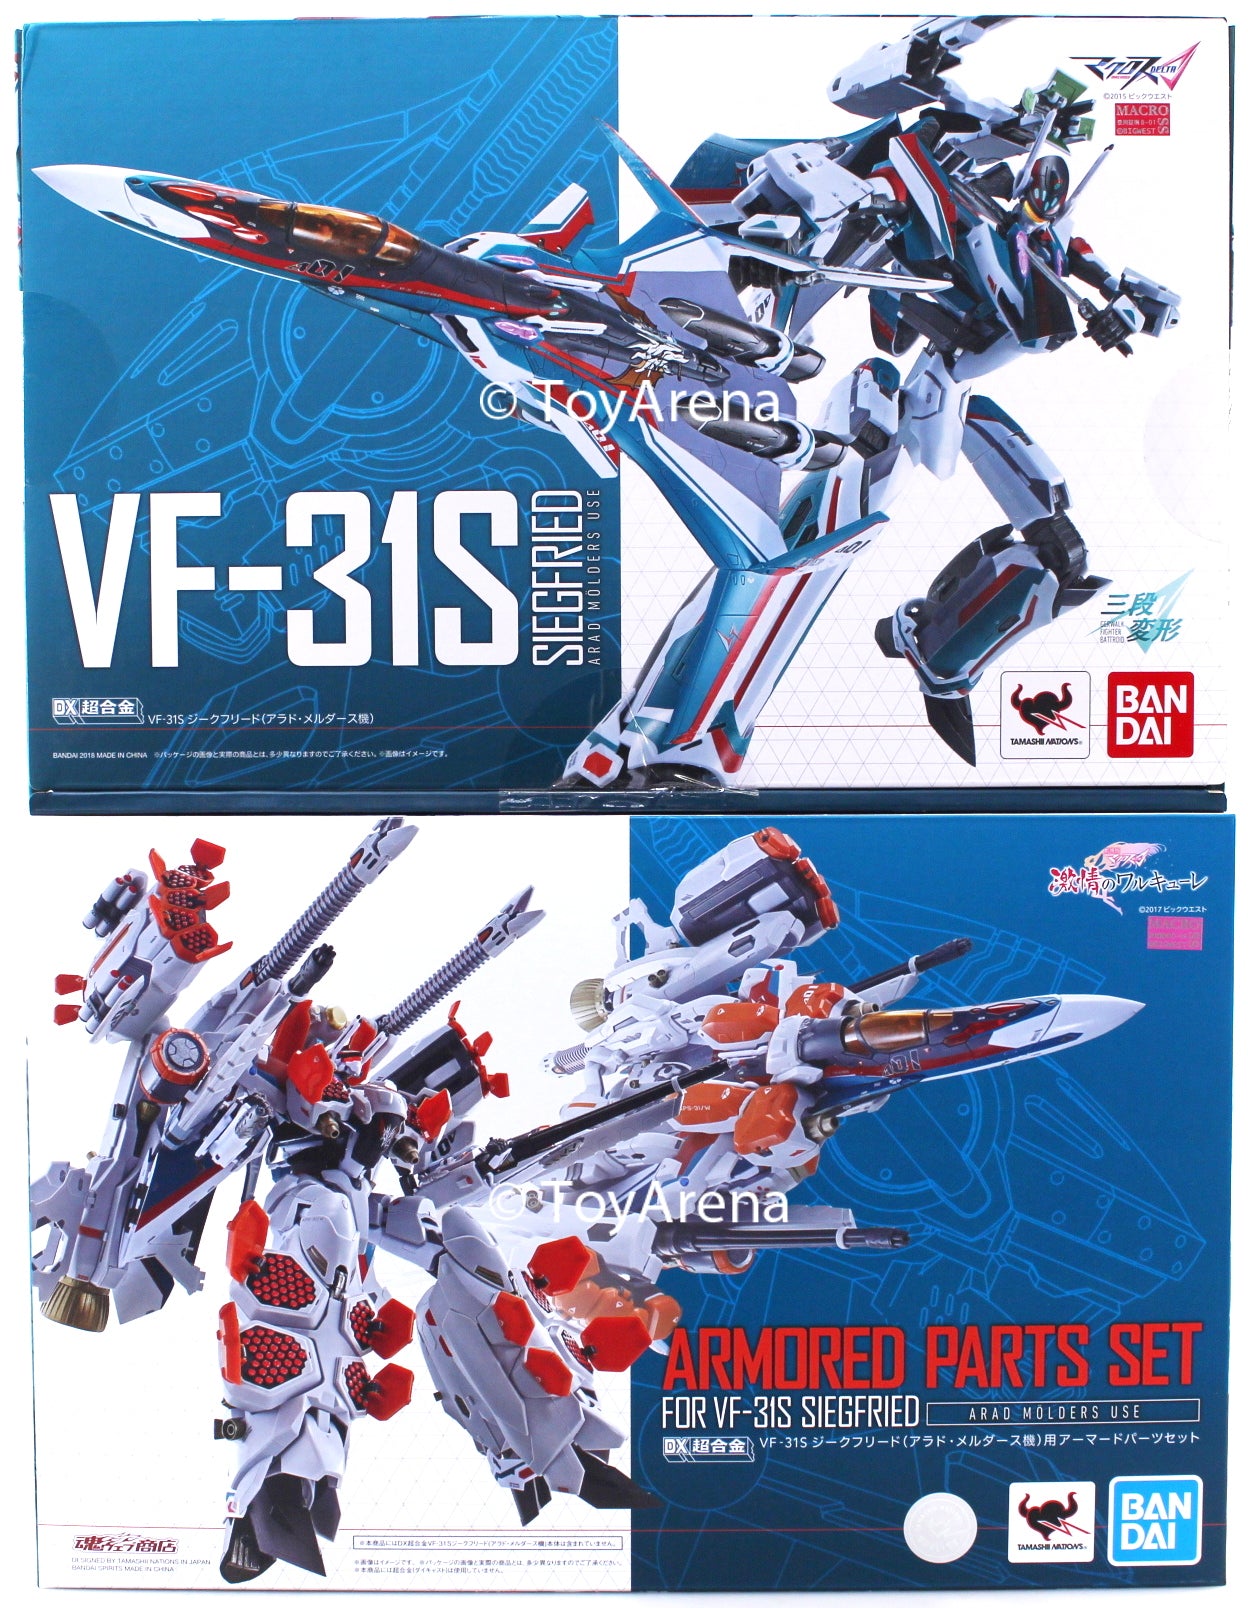 Bandai DX Chogokin Macross Delta VF-31S Siegfried with Armored Parts for Arad Molders Use Action Figure Set